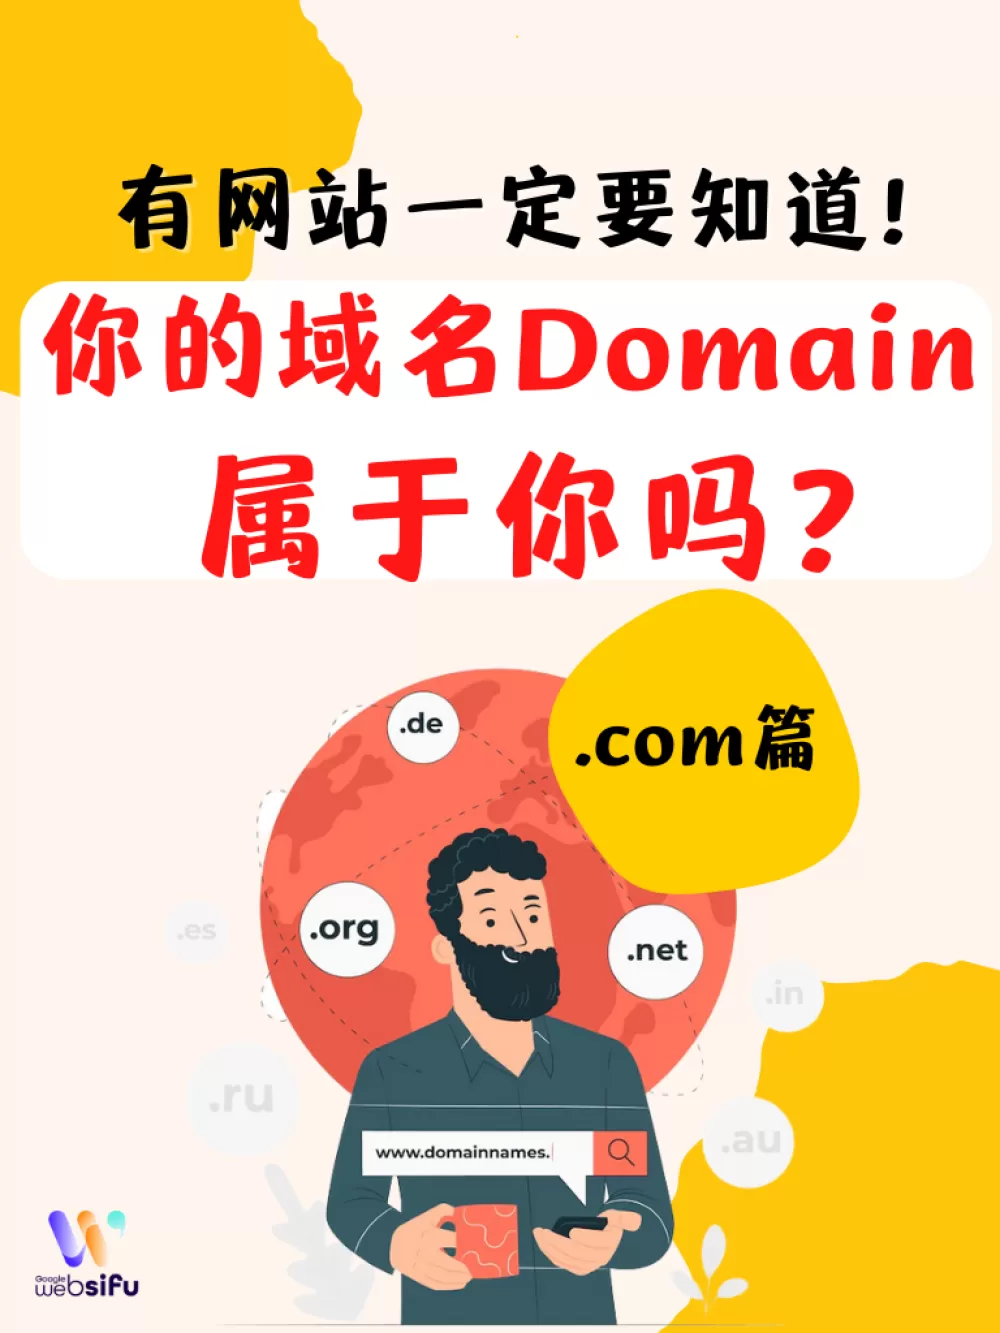 .com | Does your domain name belong to you?